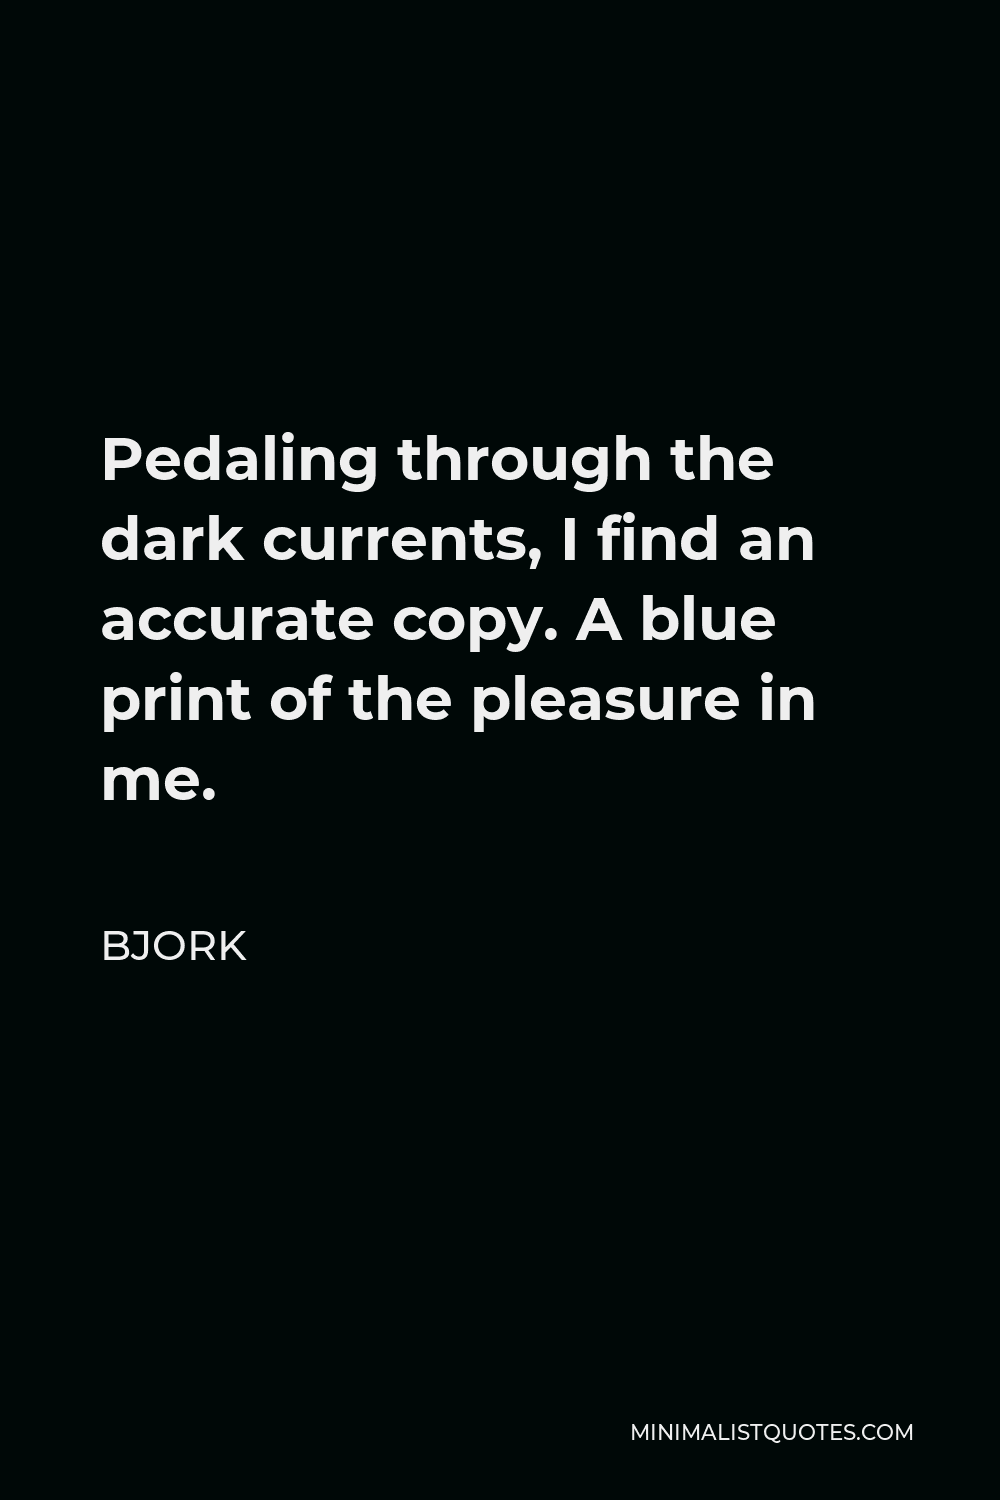 Bjork Quote - Pedaling through the dark currents, I find an accurate copy. A blue print of the pleasure in me.